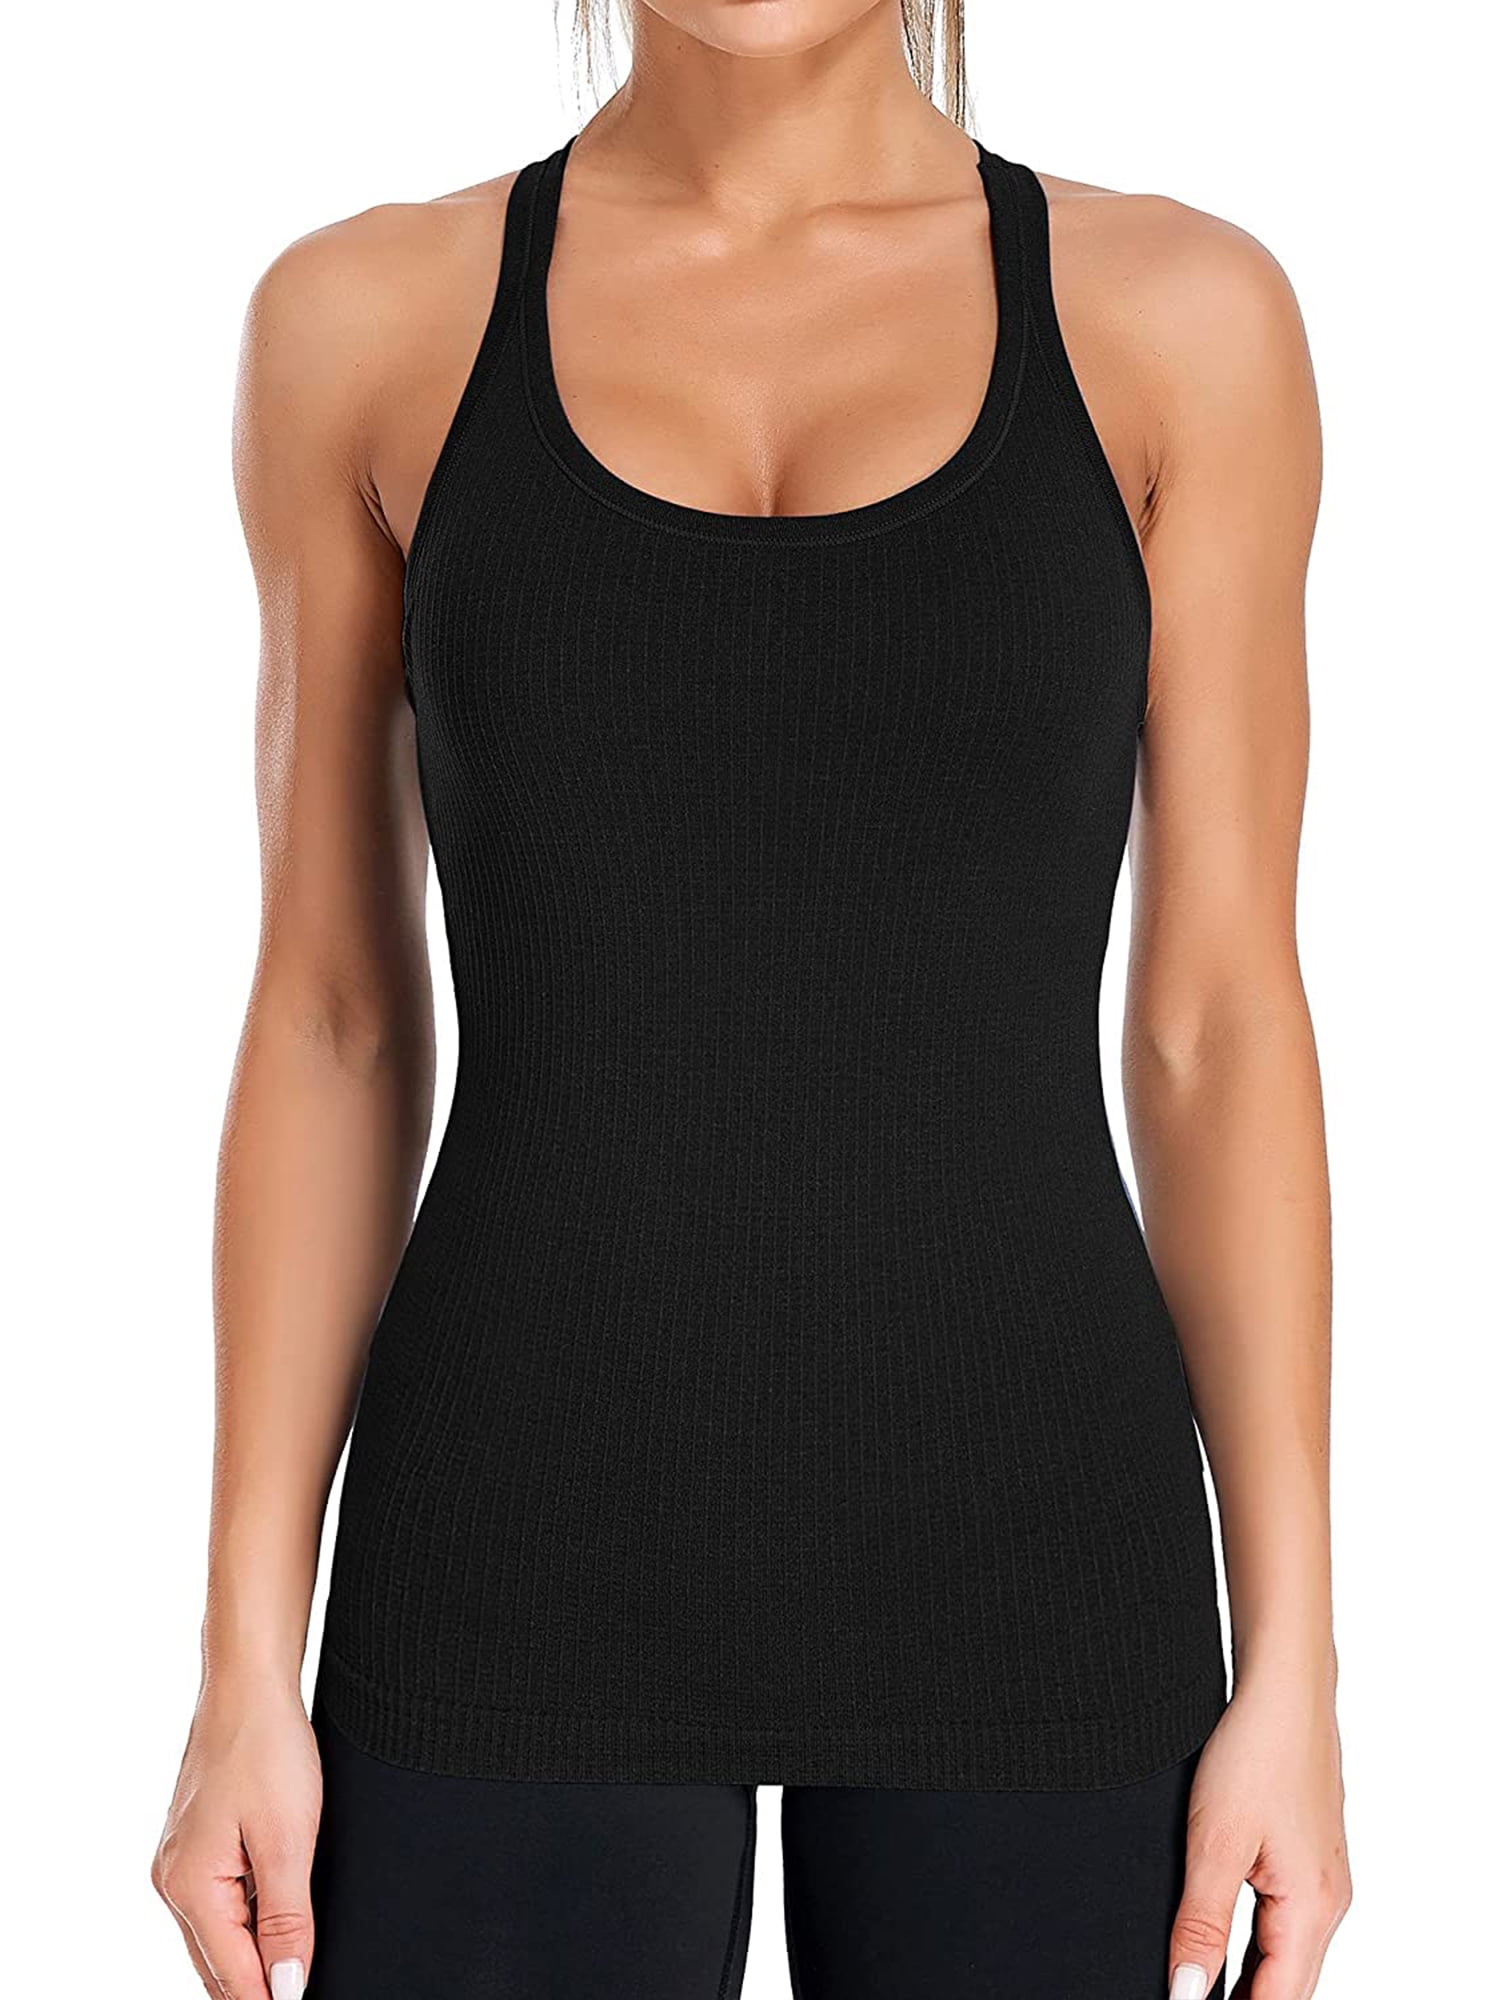 Womens Ribbed Tank Tops with Built in Bra, Raceback Padded Workout Tops  with Support, Tight Athletic Sports Bra